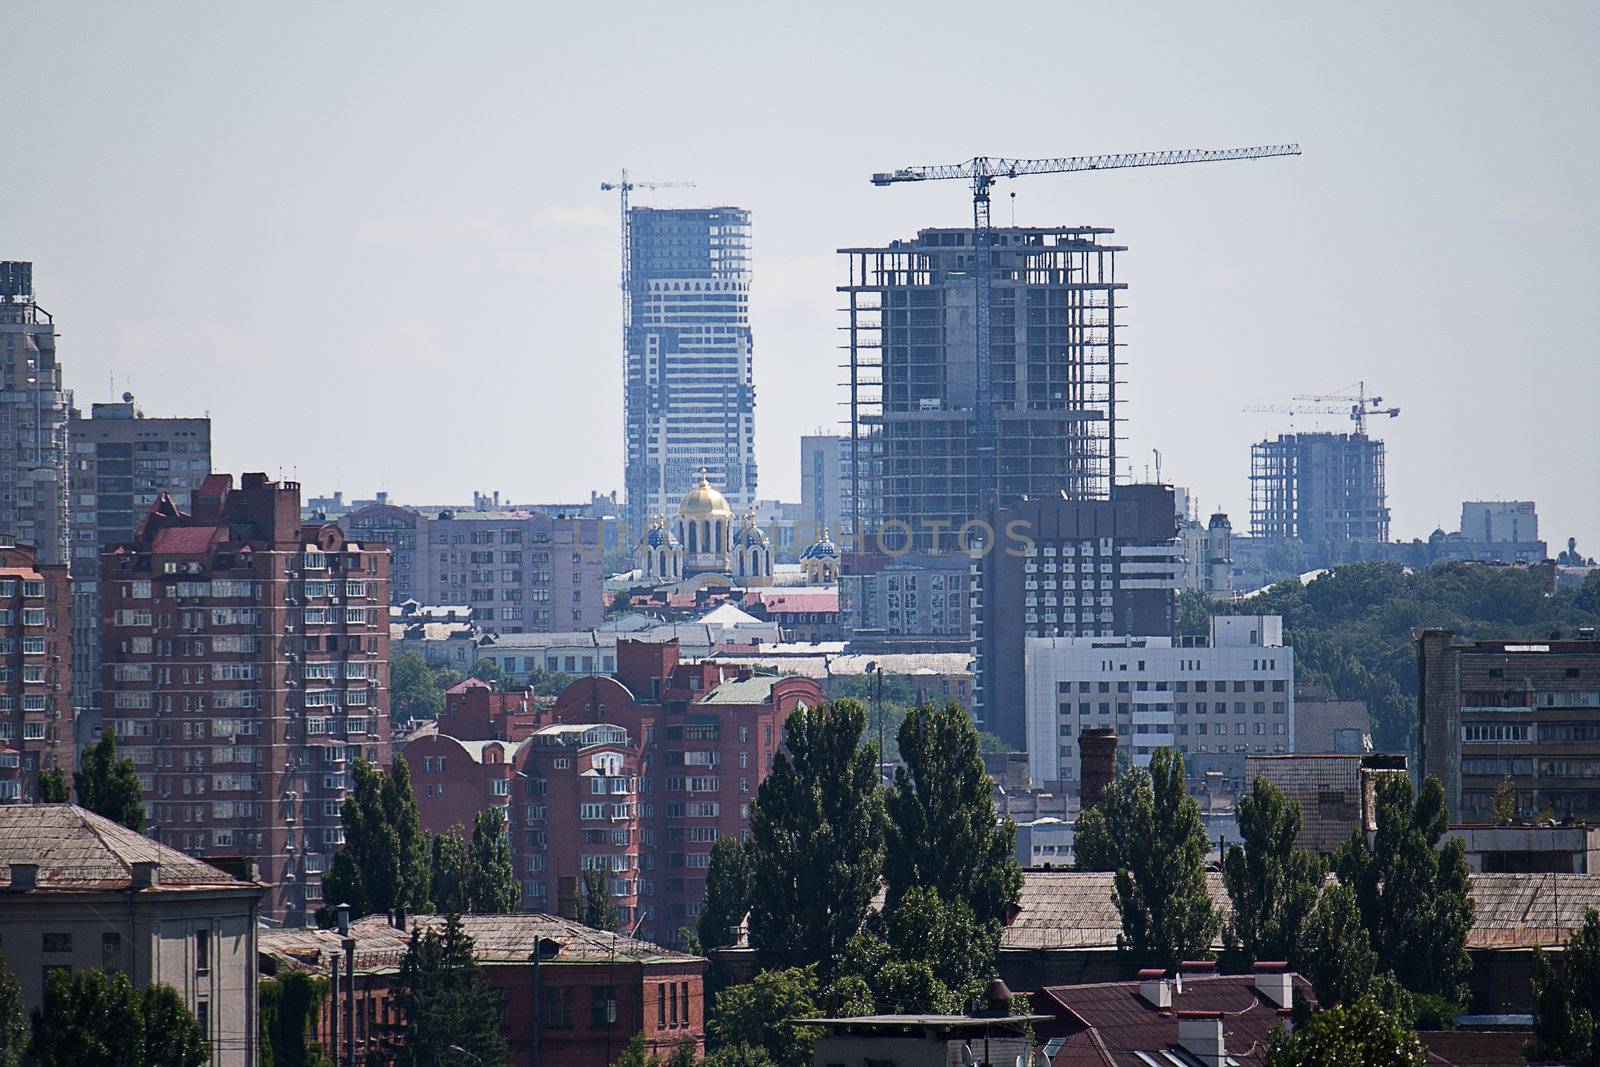 View of the city under construction by victosha